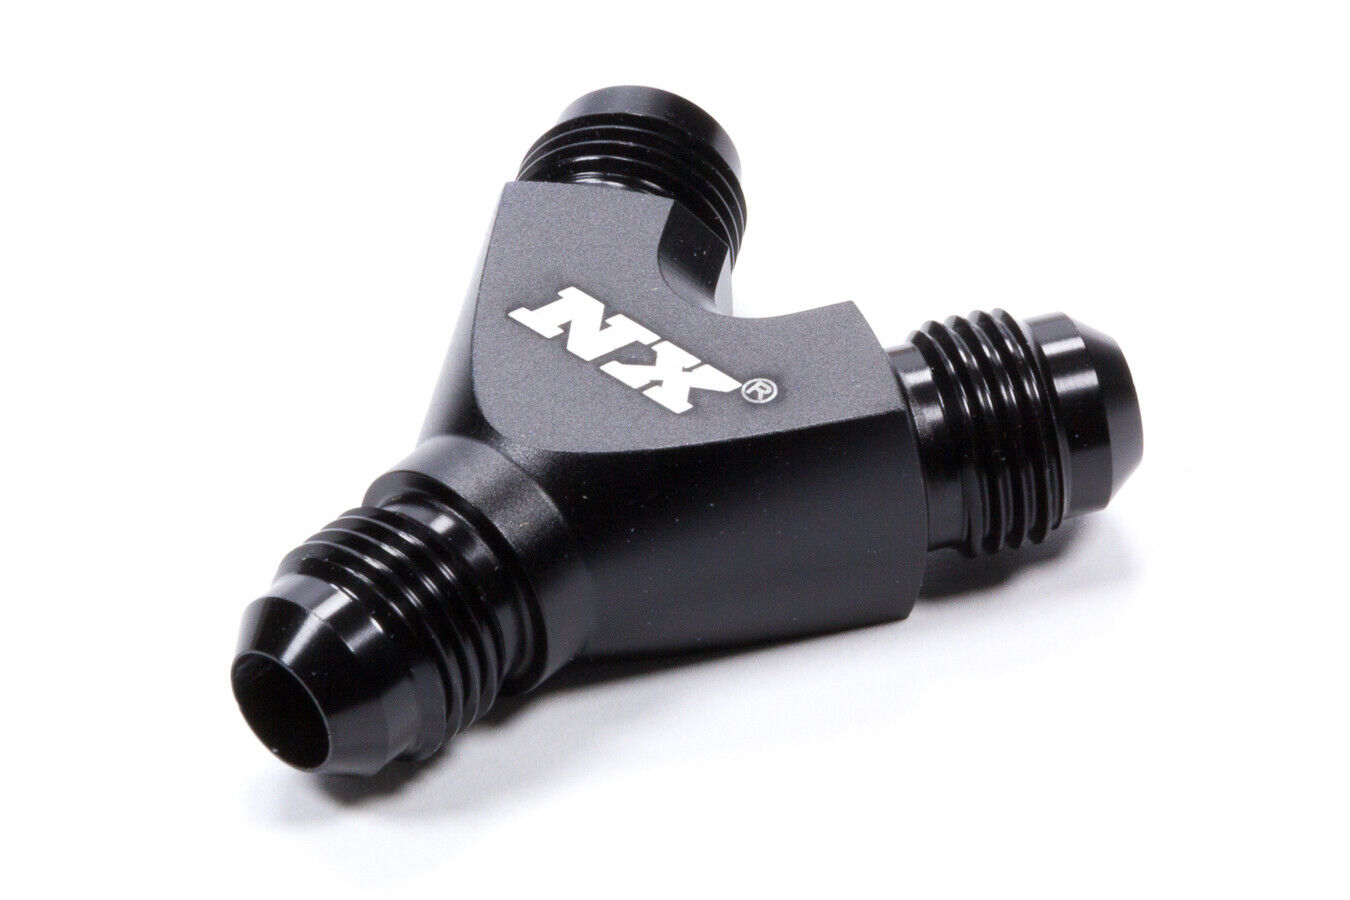 NITROUS EXPRESS Billet Y-Fitting Manufacturer regenerated latest product - P Black 16386 N 6x6x6